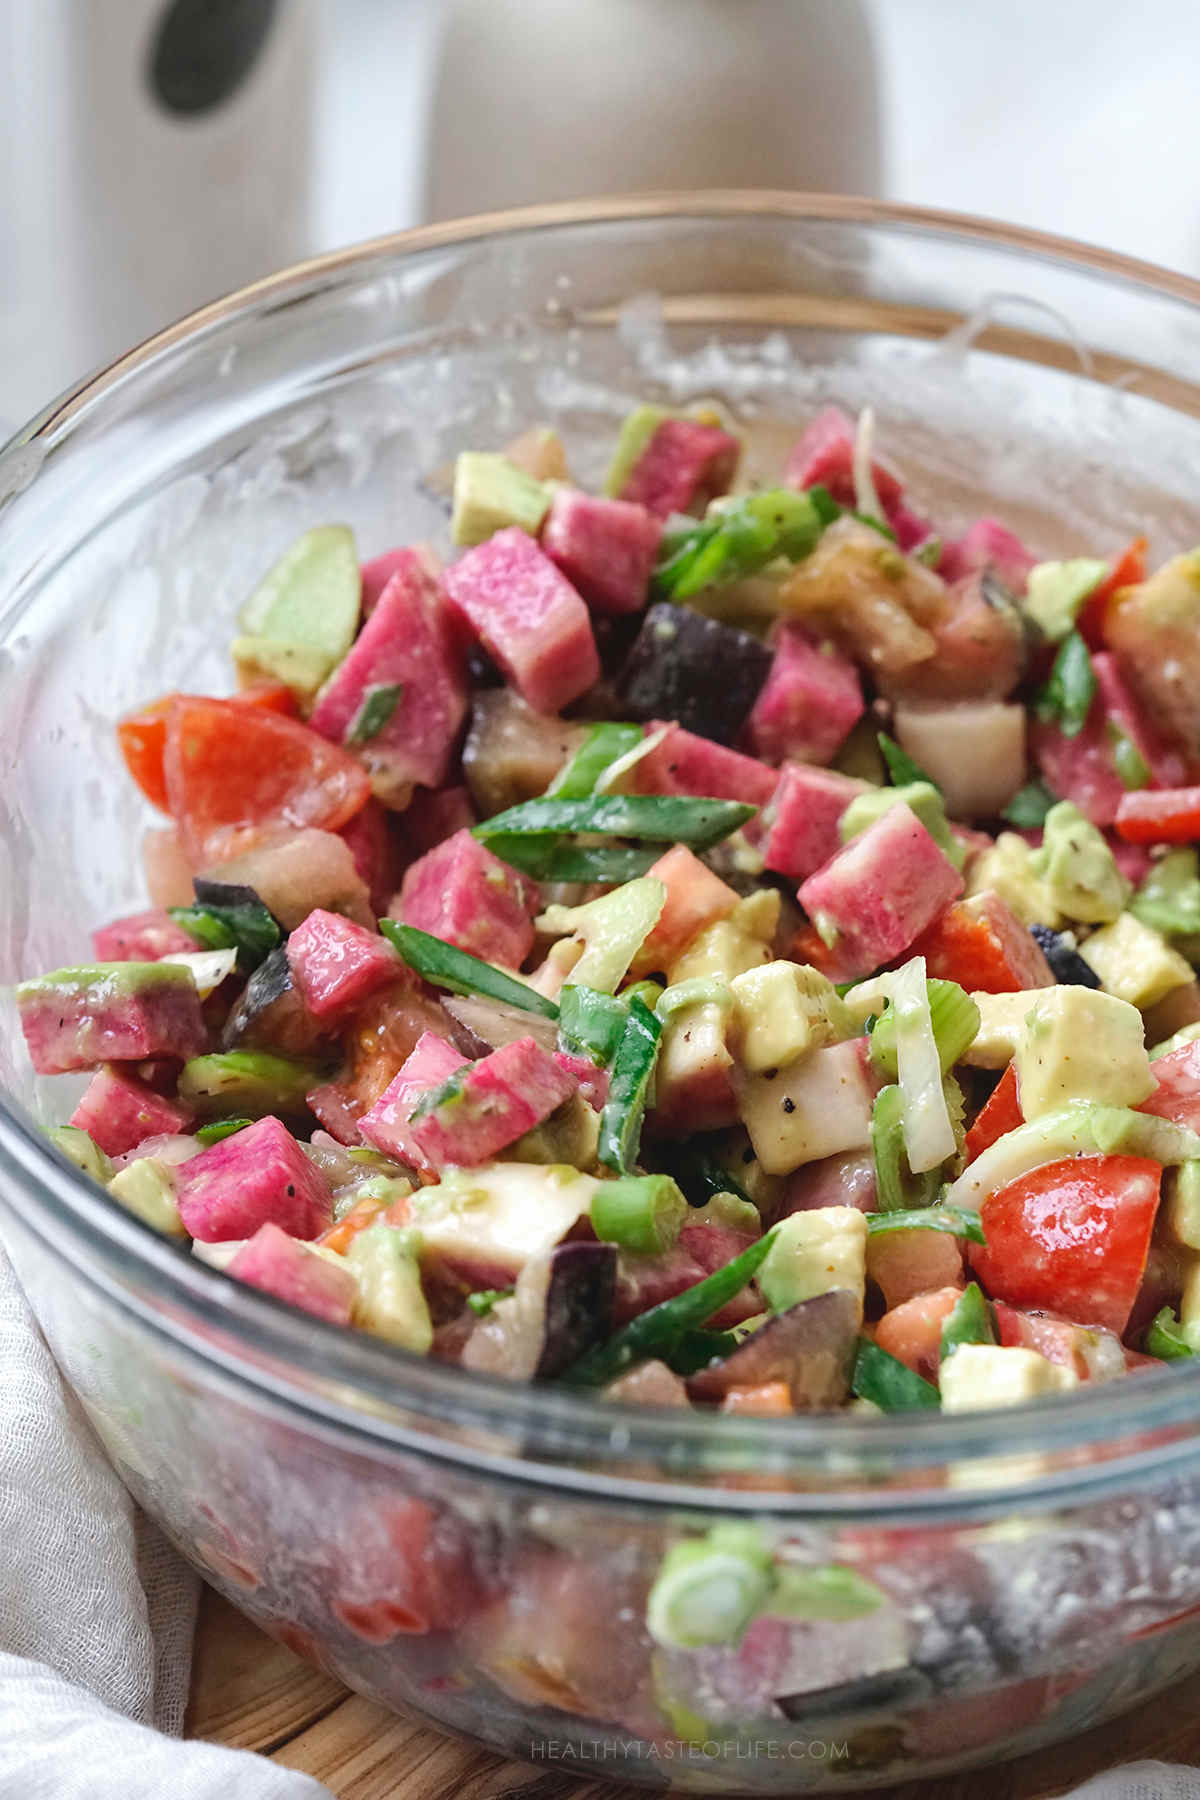 Assembled salad with watermelon radishes avocado tomatoes and spring onions in a bowl.